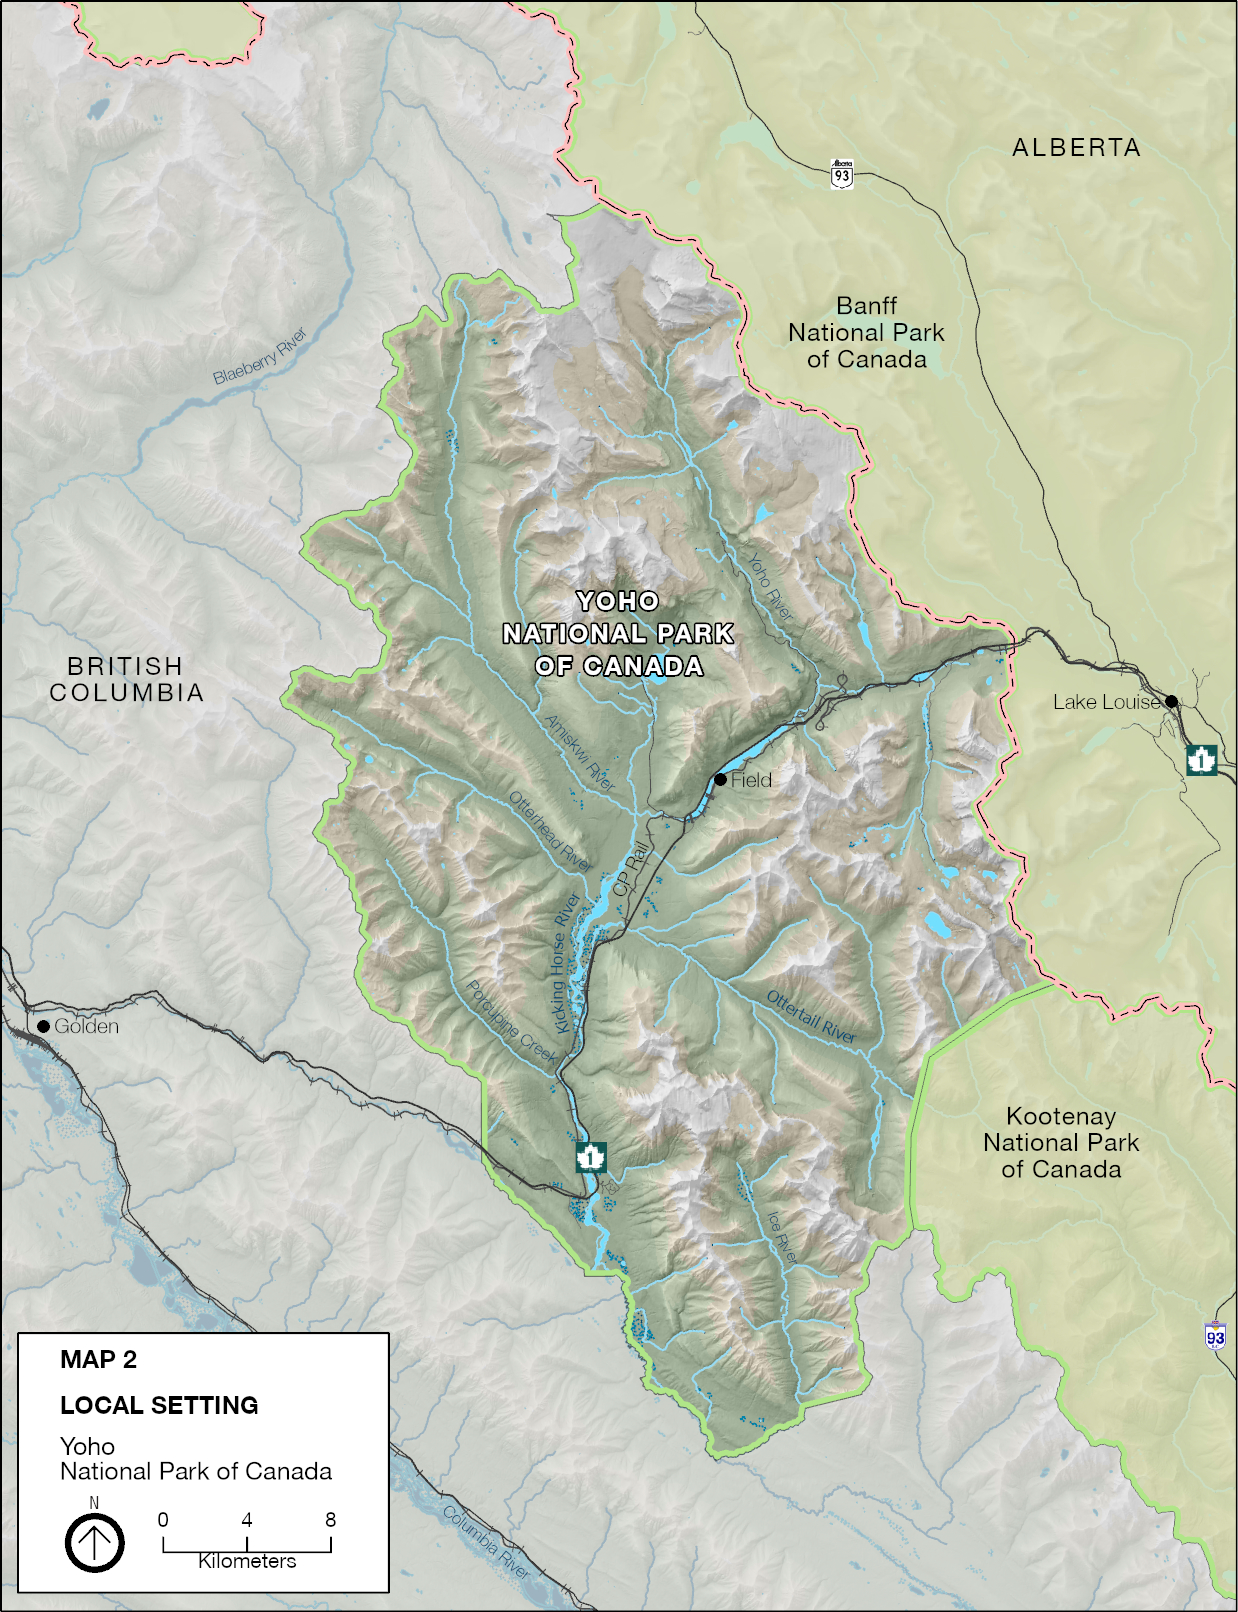 Local landscape with park boundaries, main waterways, Highway 1, and adjoining portions of Banff and Kootenay national parks. — Text description follows